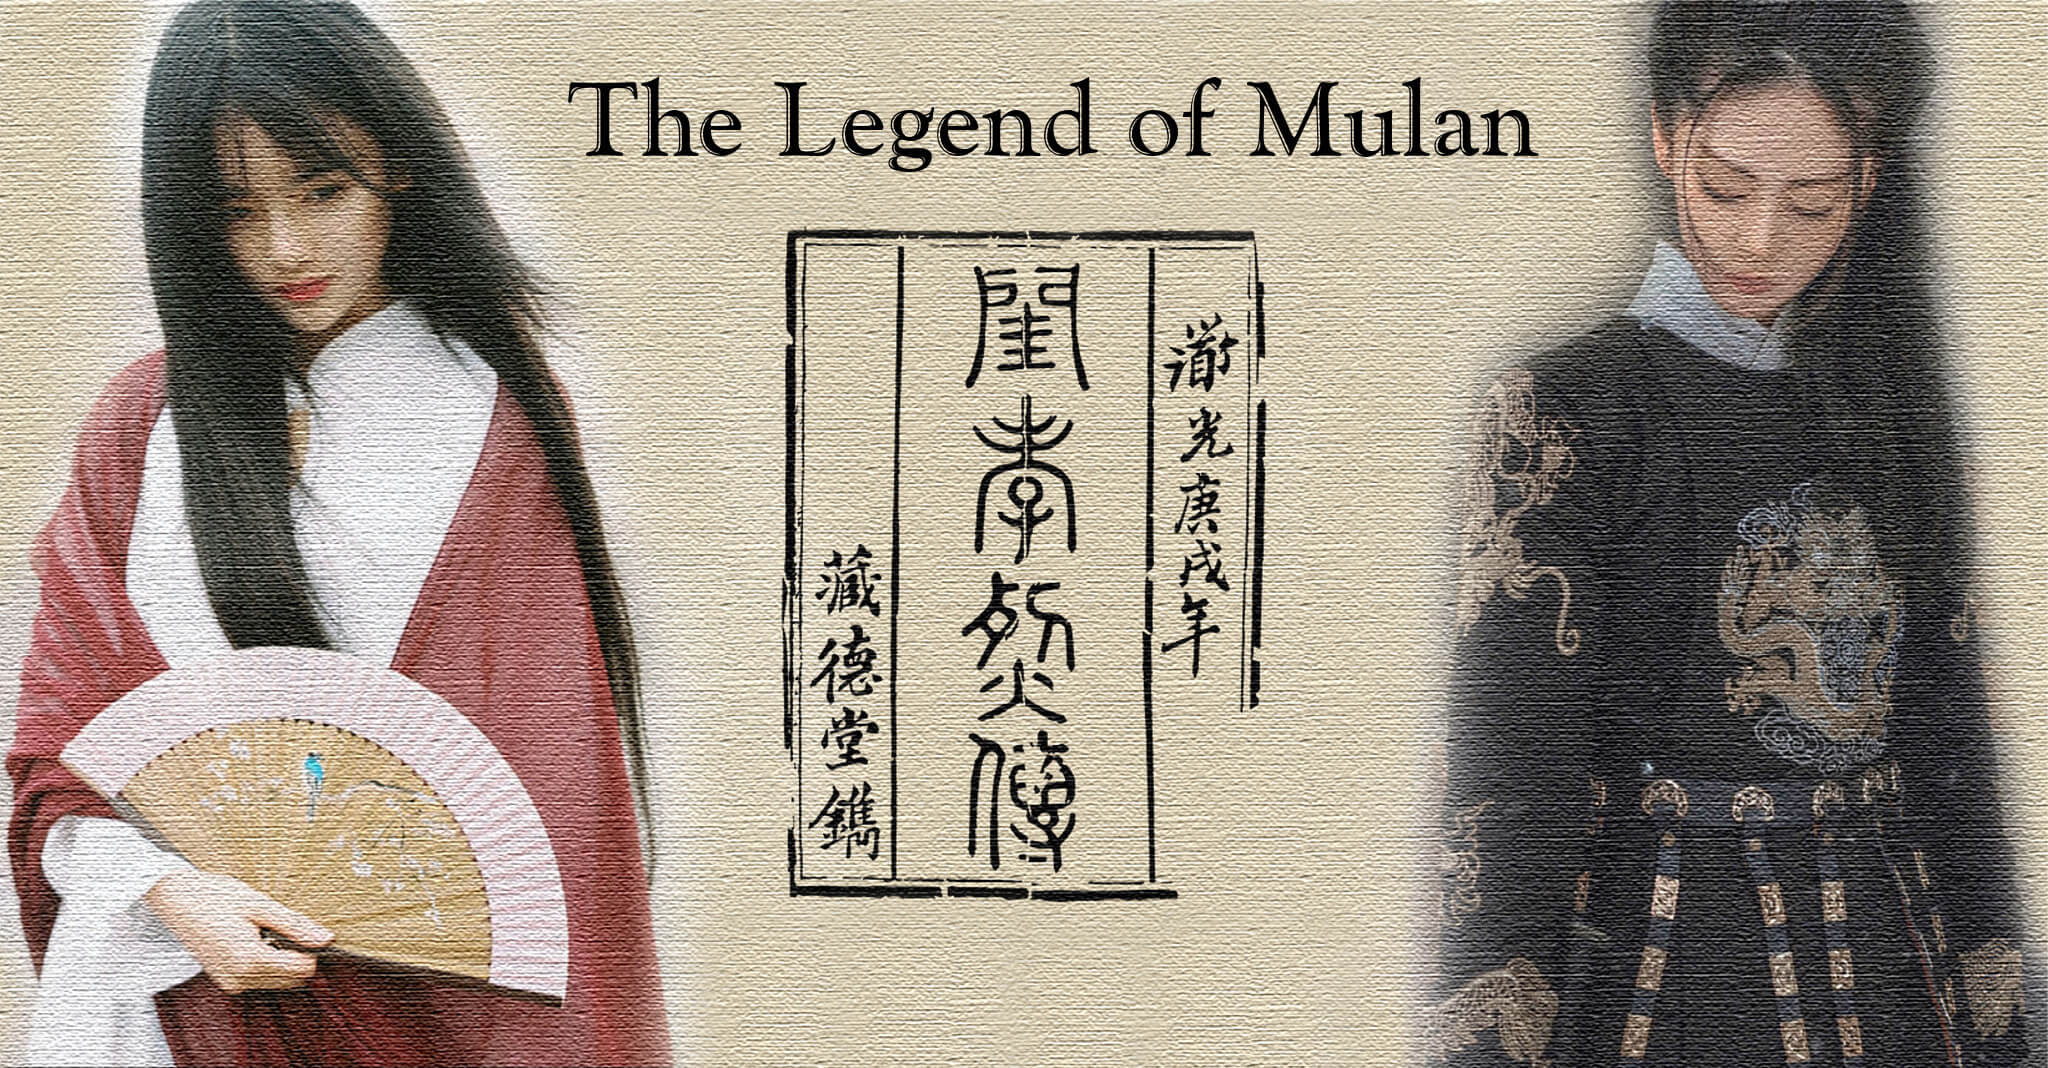 Two modern depictions of Mulan stand in opposition to the title page of the Qing dynasty novel Fierce and Filial. Artwork by Stella Su.